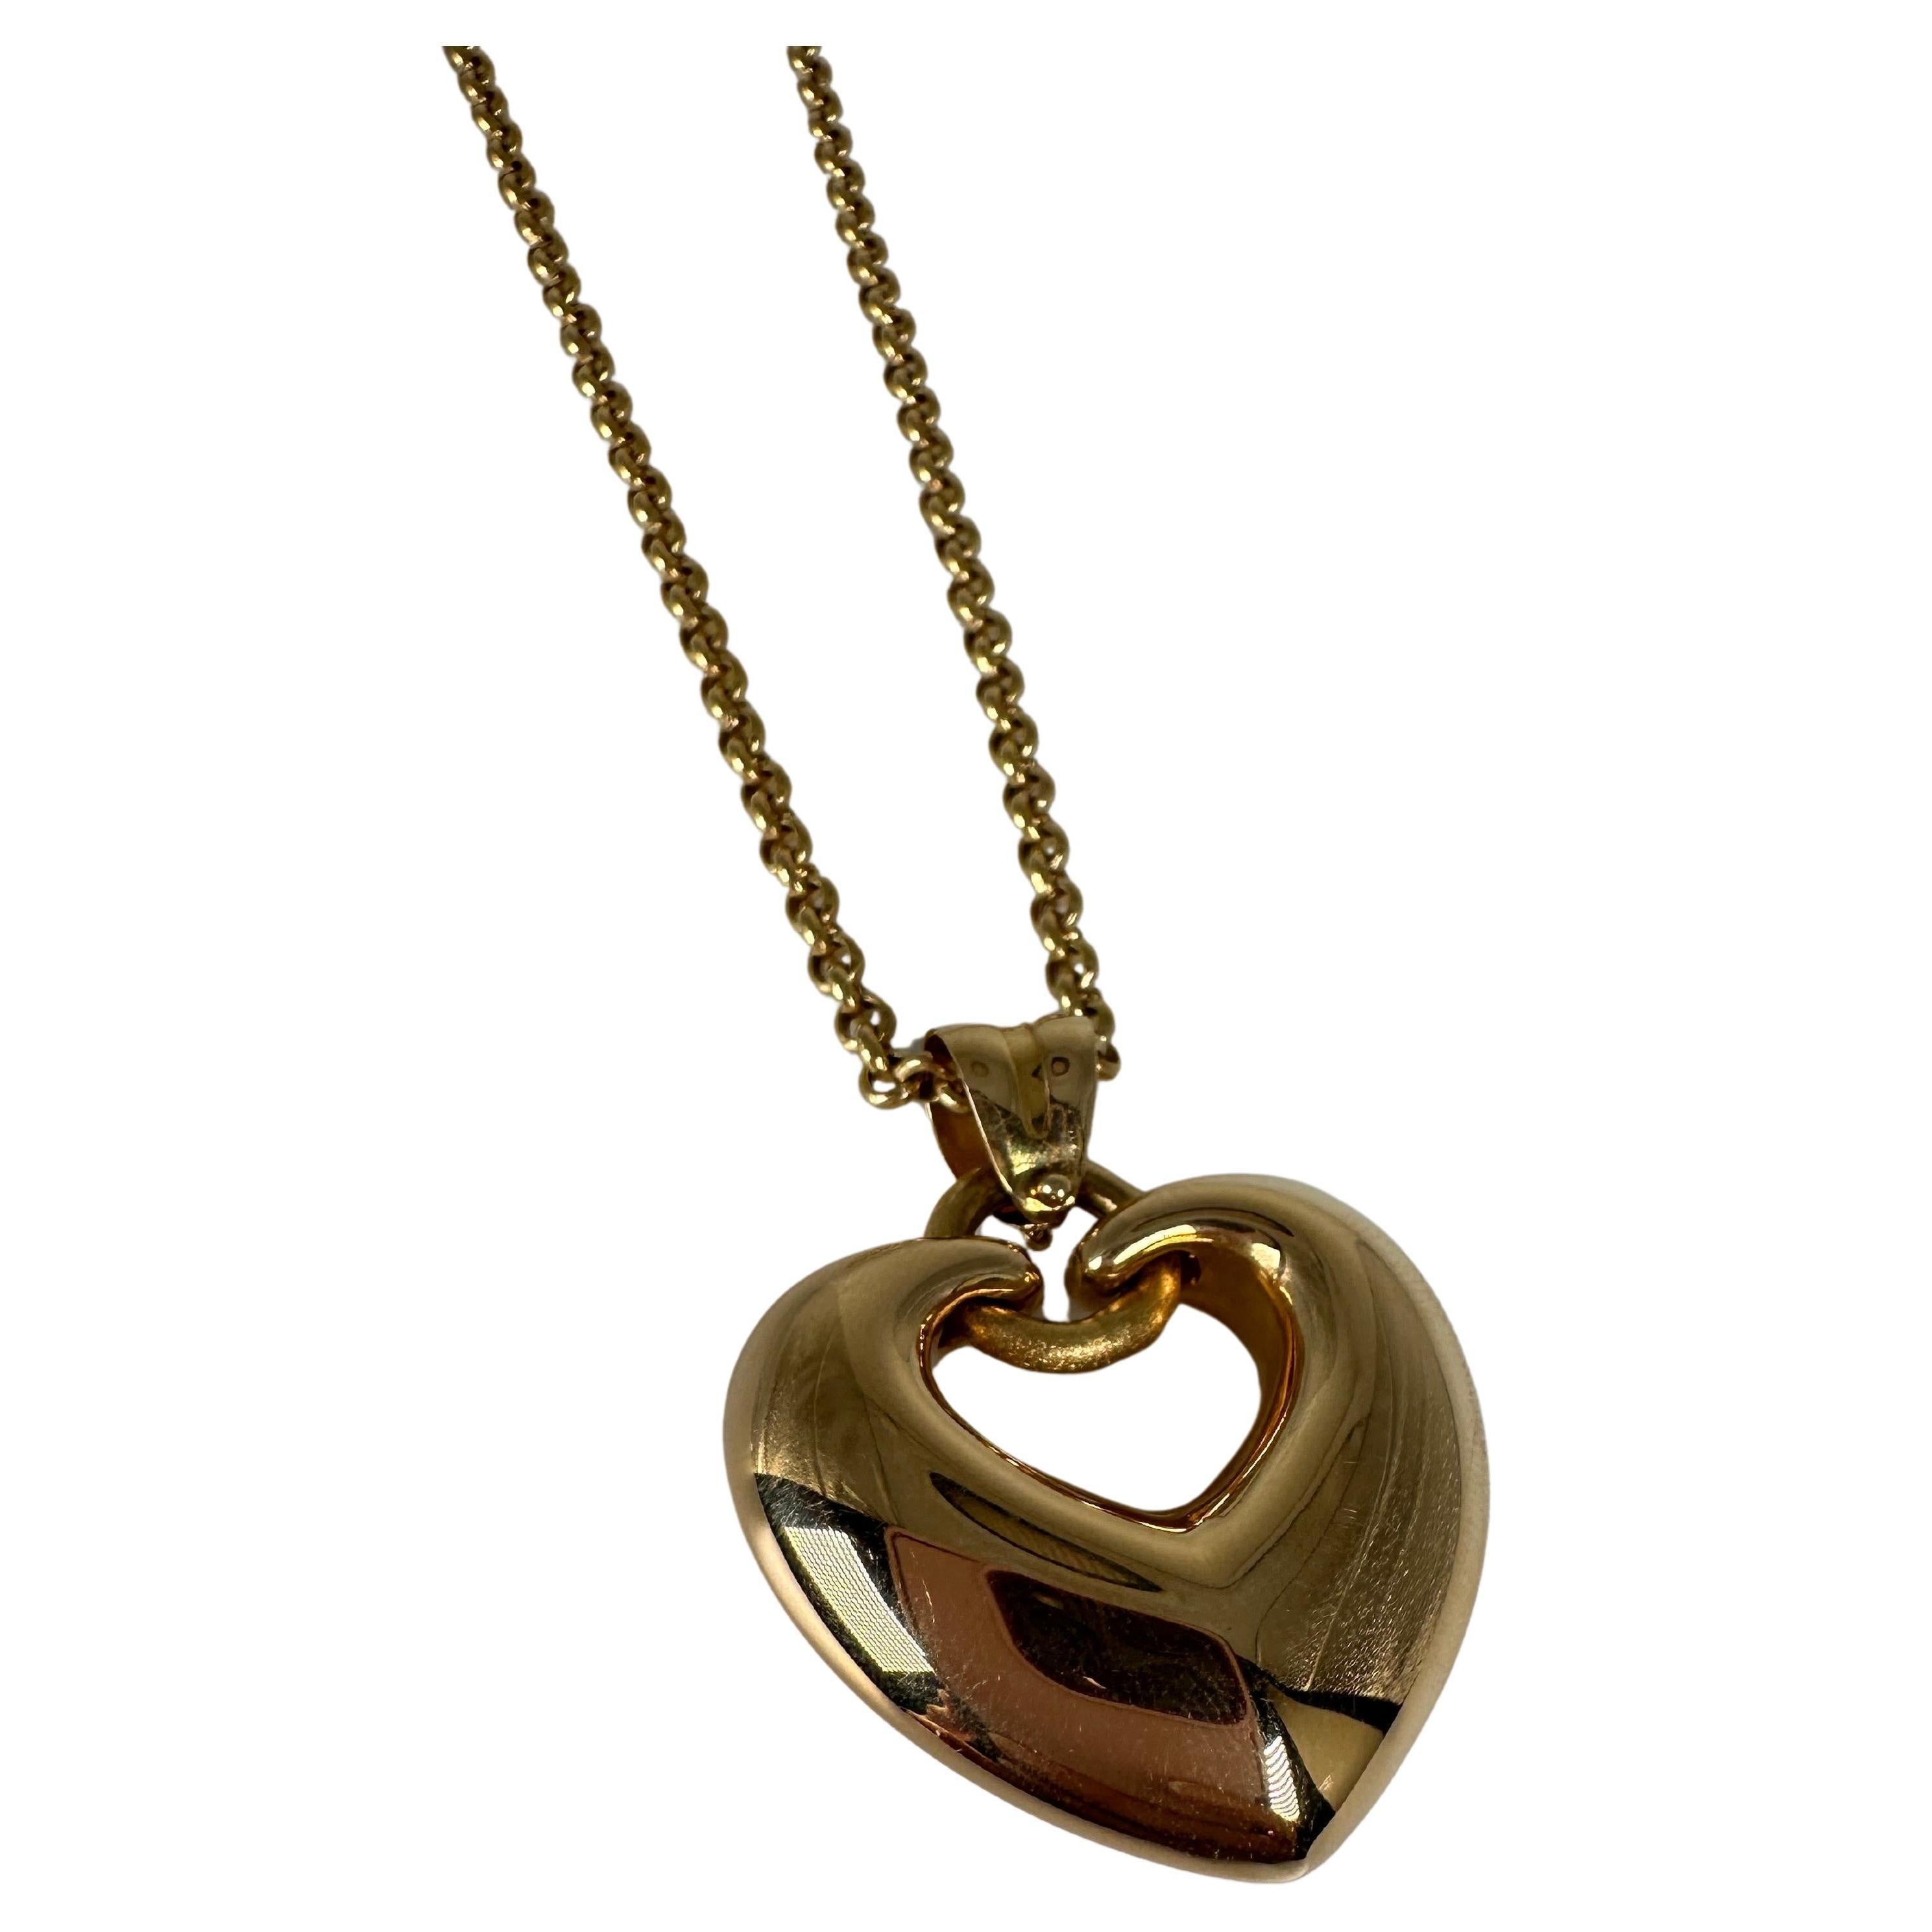 Stunning large puffed heart in a fancy rolo chain made in 14KT gold, Weighs more than 17 grams and willo get you so many compliments! 

GRAM WEIGHT: 17.00gr+
GOLD: 14KT yelllow gold
CLOSURE: FANCY


WHAT YOU GET AT STAMPAR JEWELERS:
Stampar